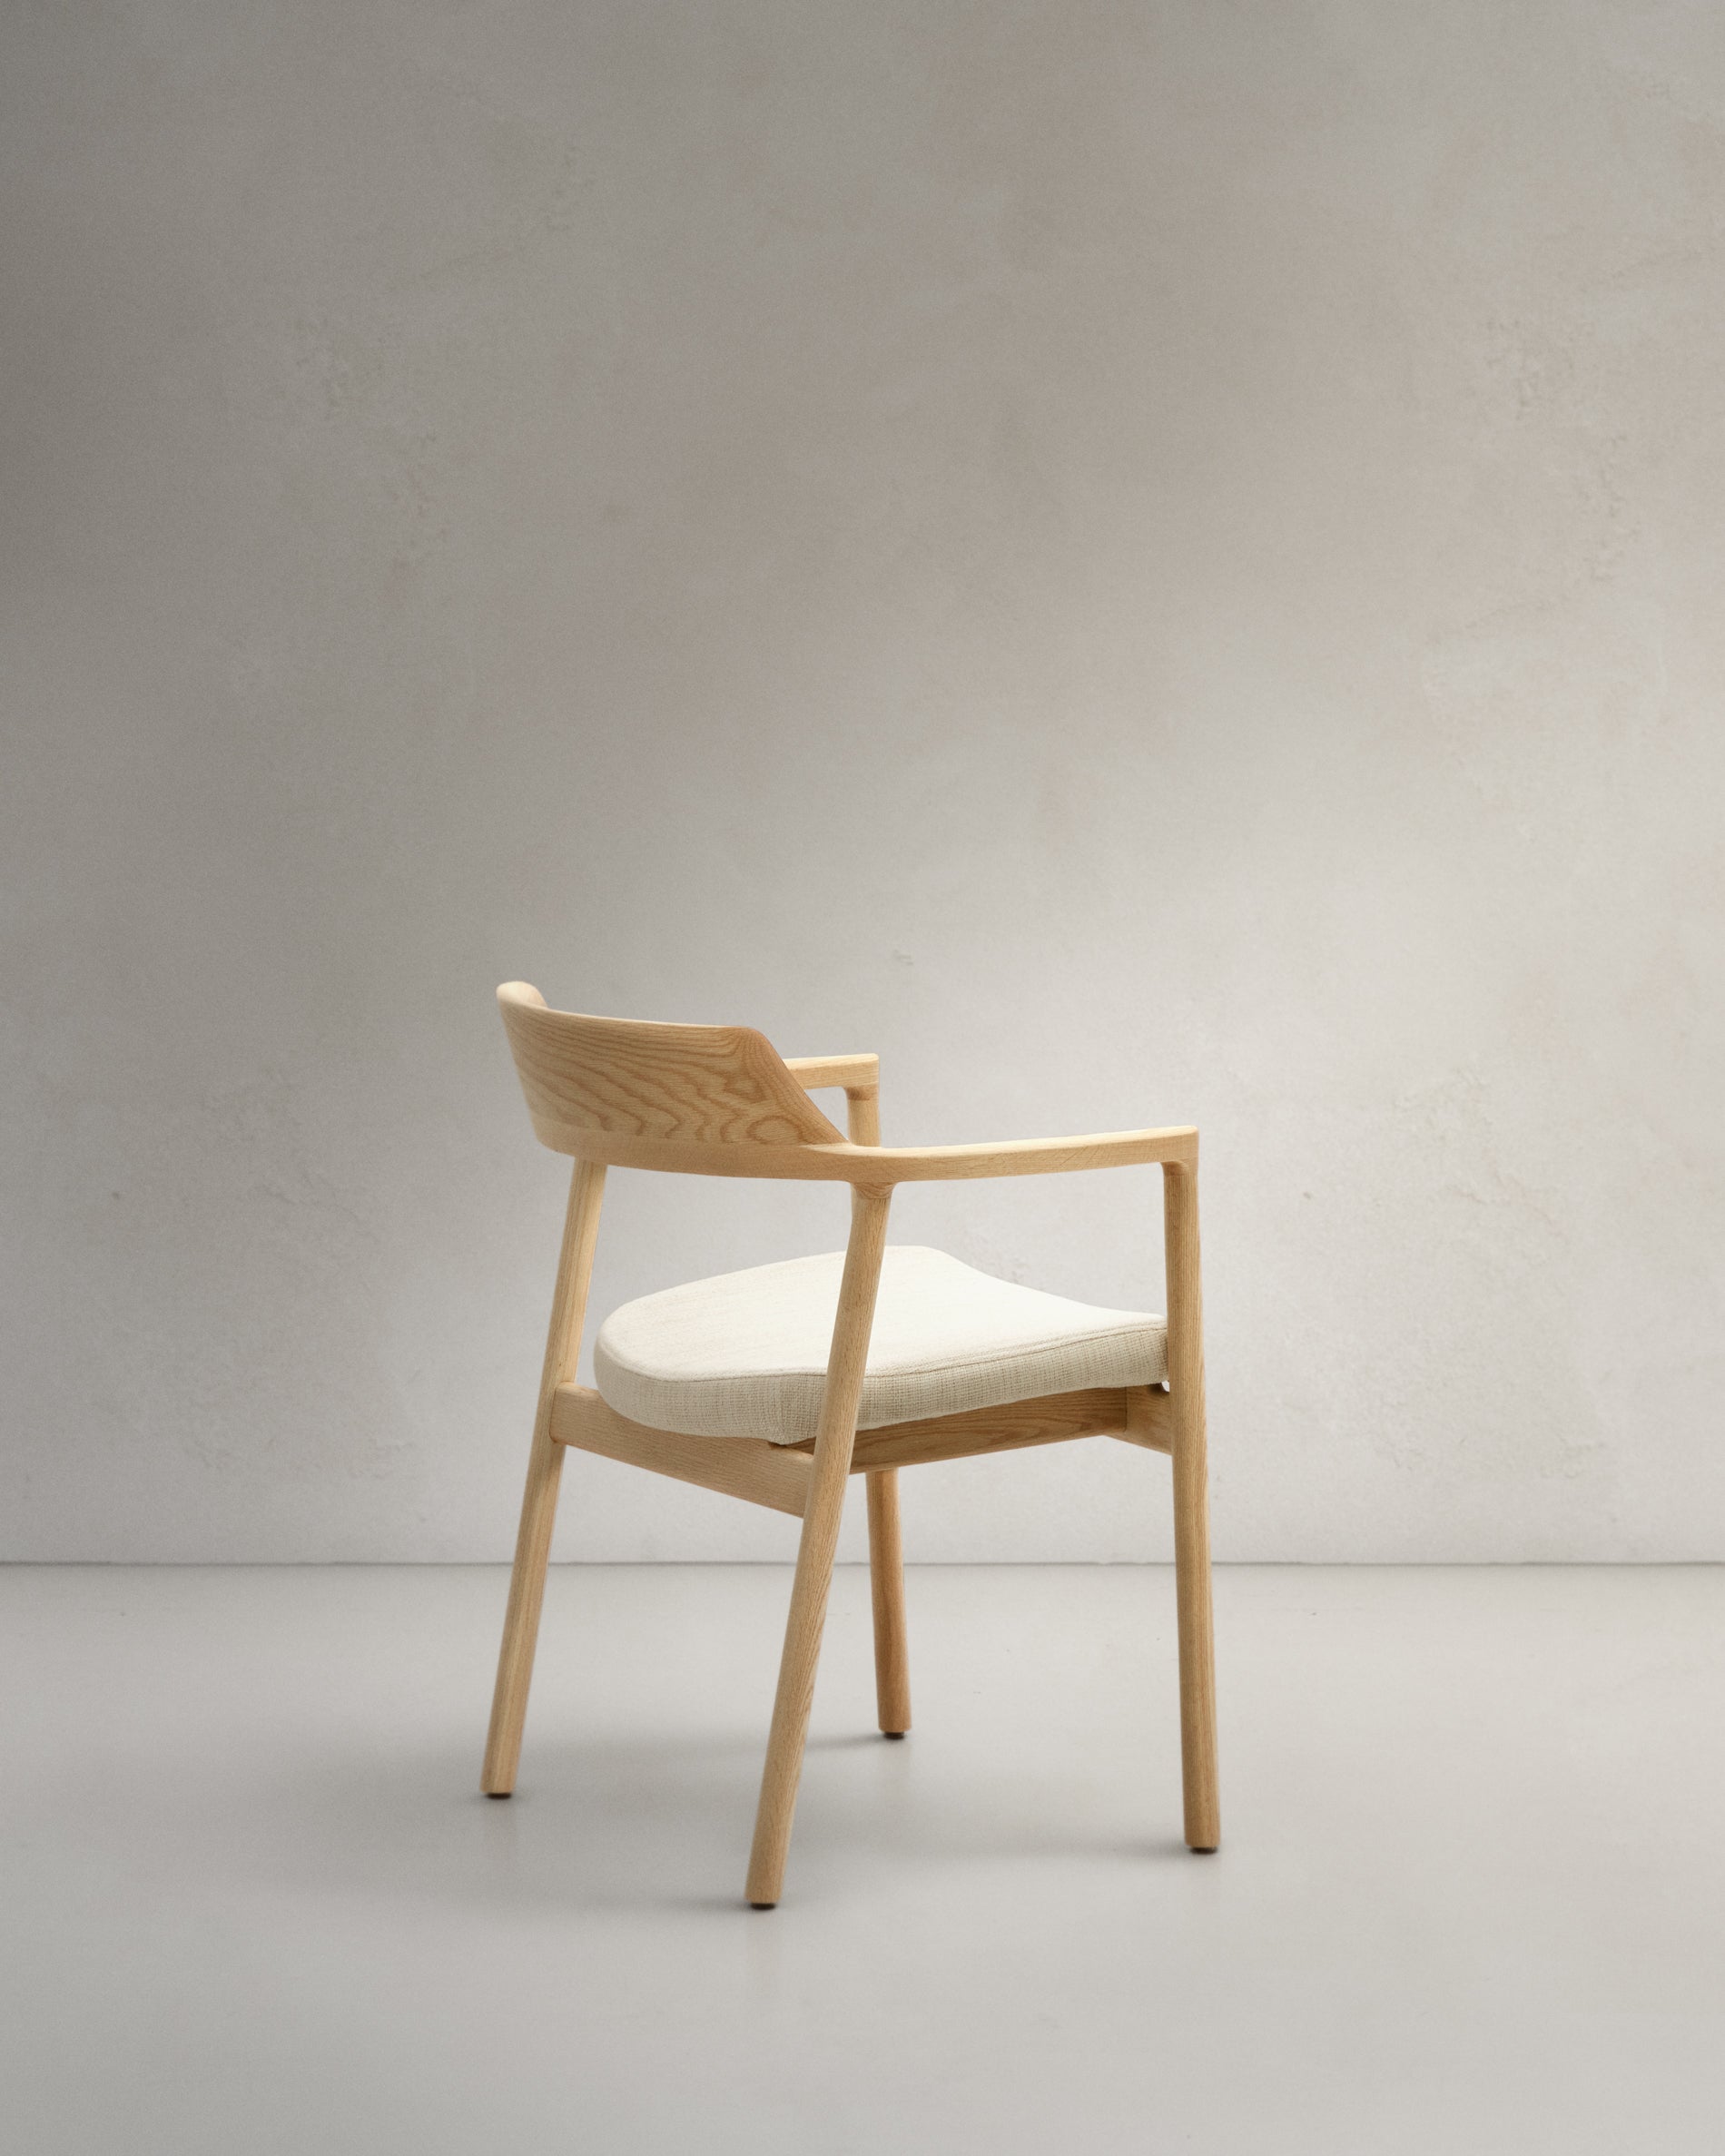 Low chair with removable cover beige chenille, solid oak wood with natural finish FSC Mix Credit